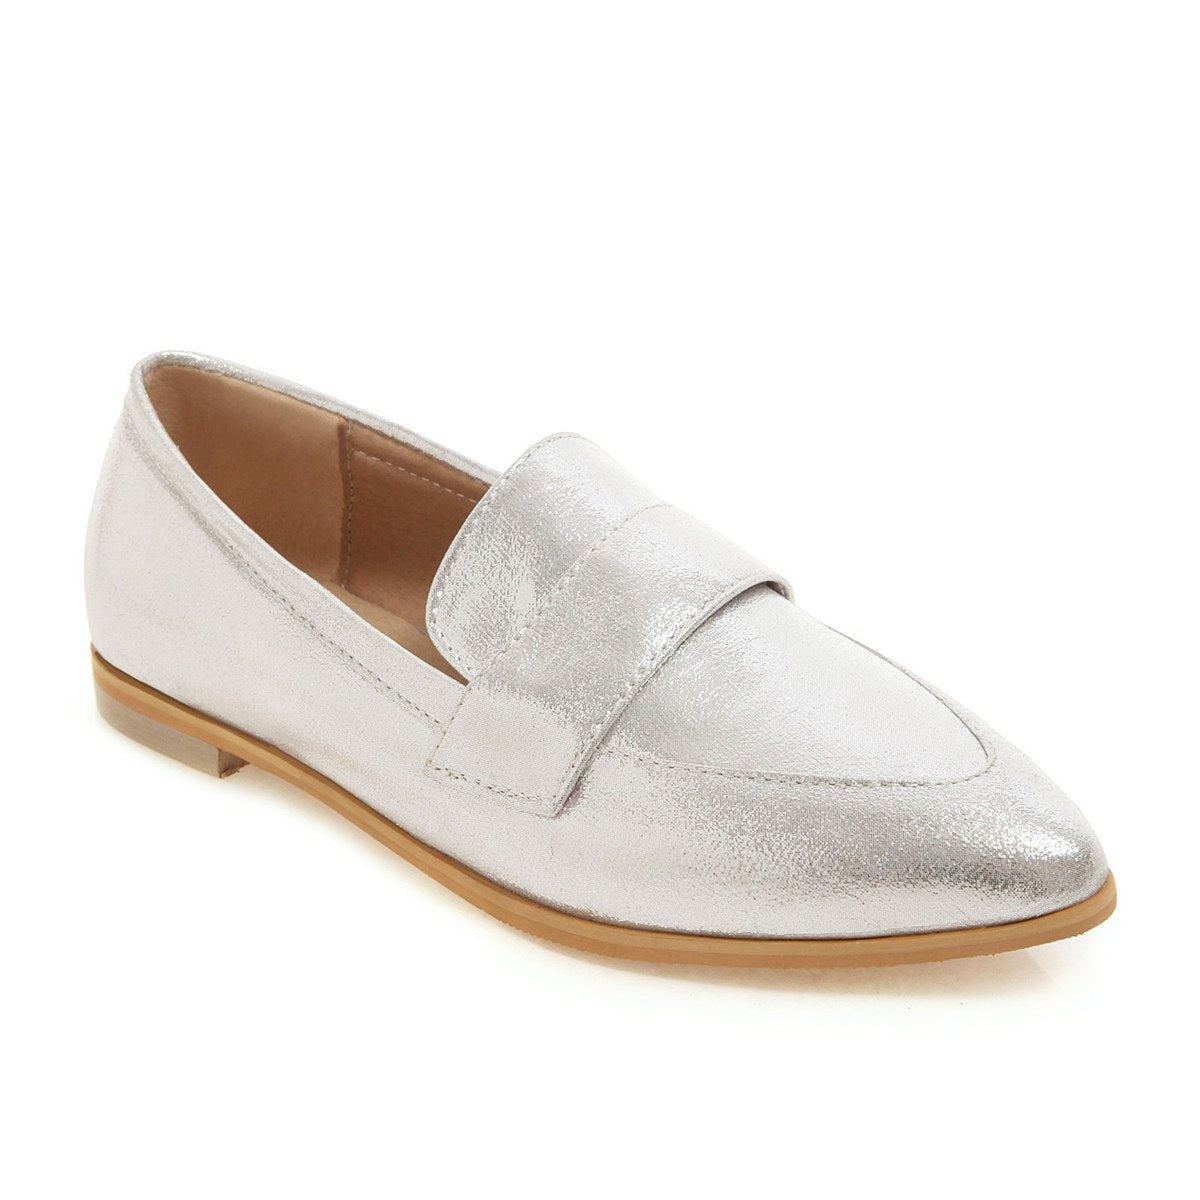 Women's silver gold metallic pointed toe loafers casual daily flats